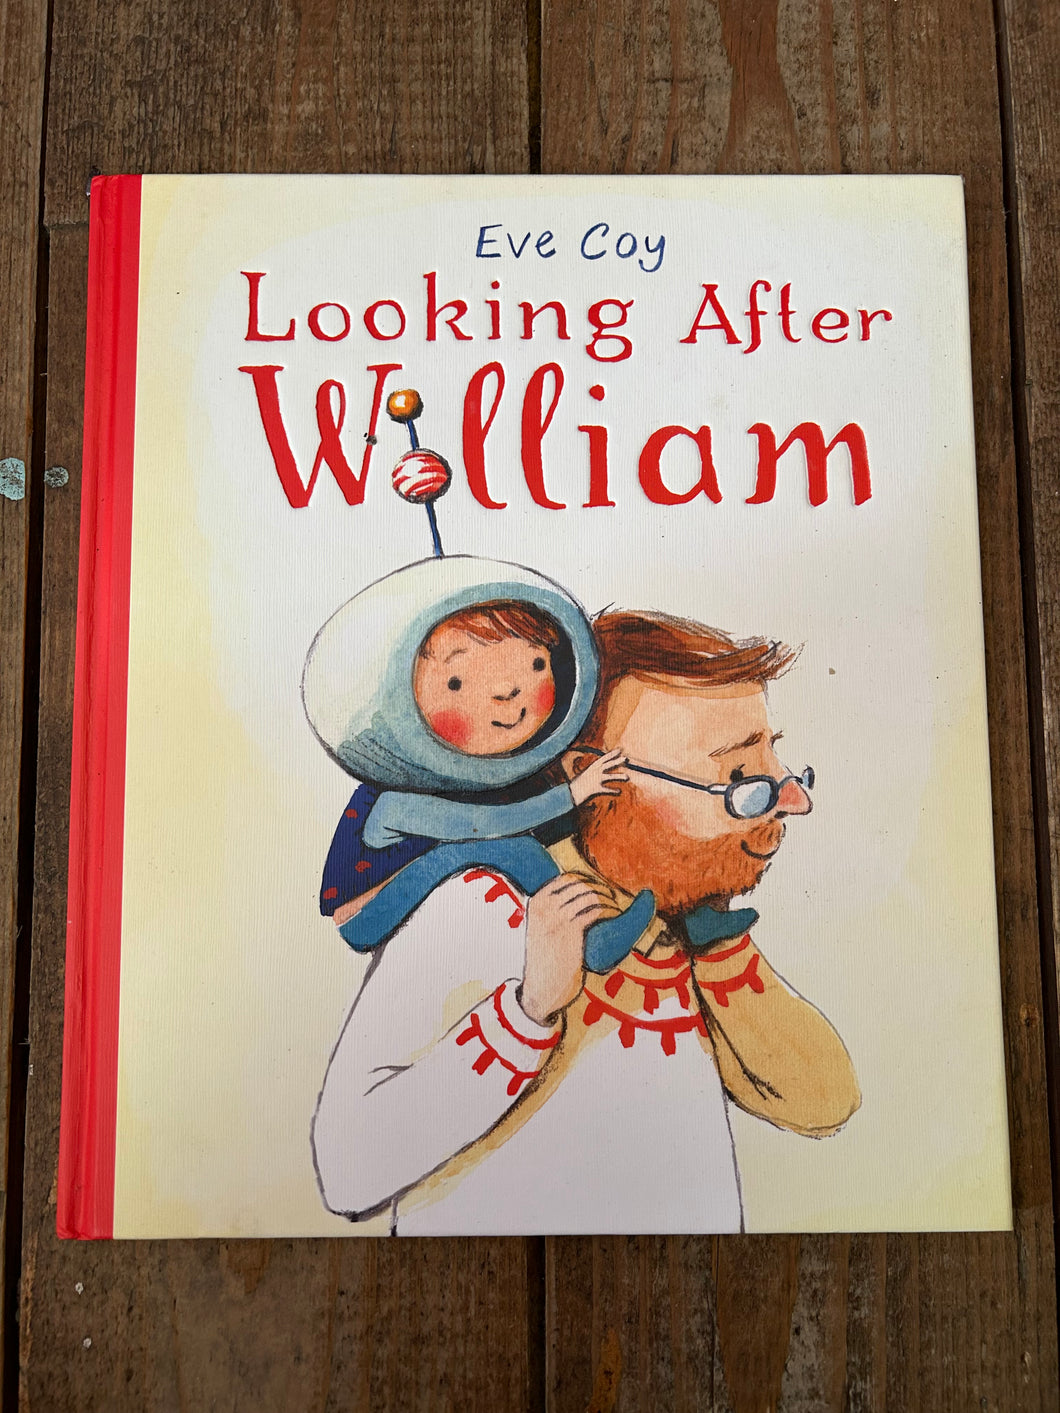 Looking after William by Eve coy